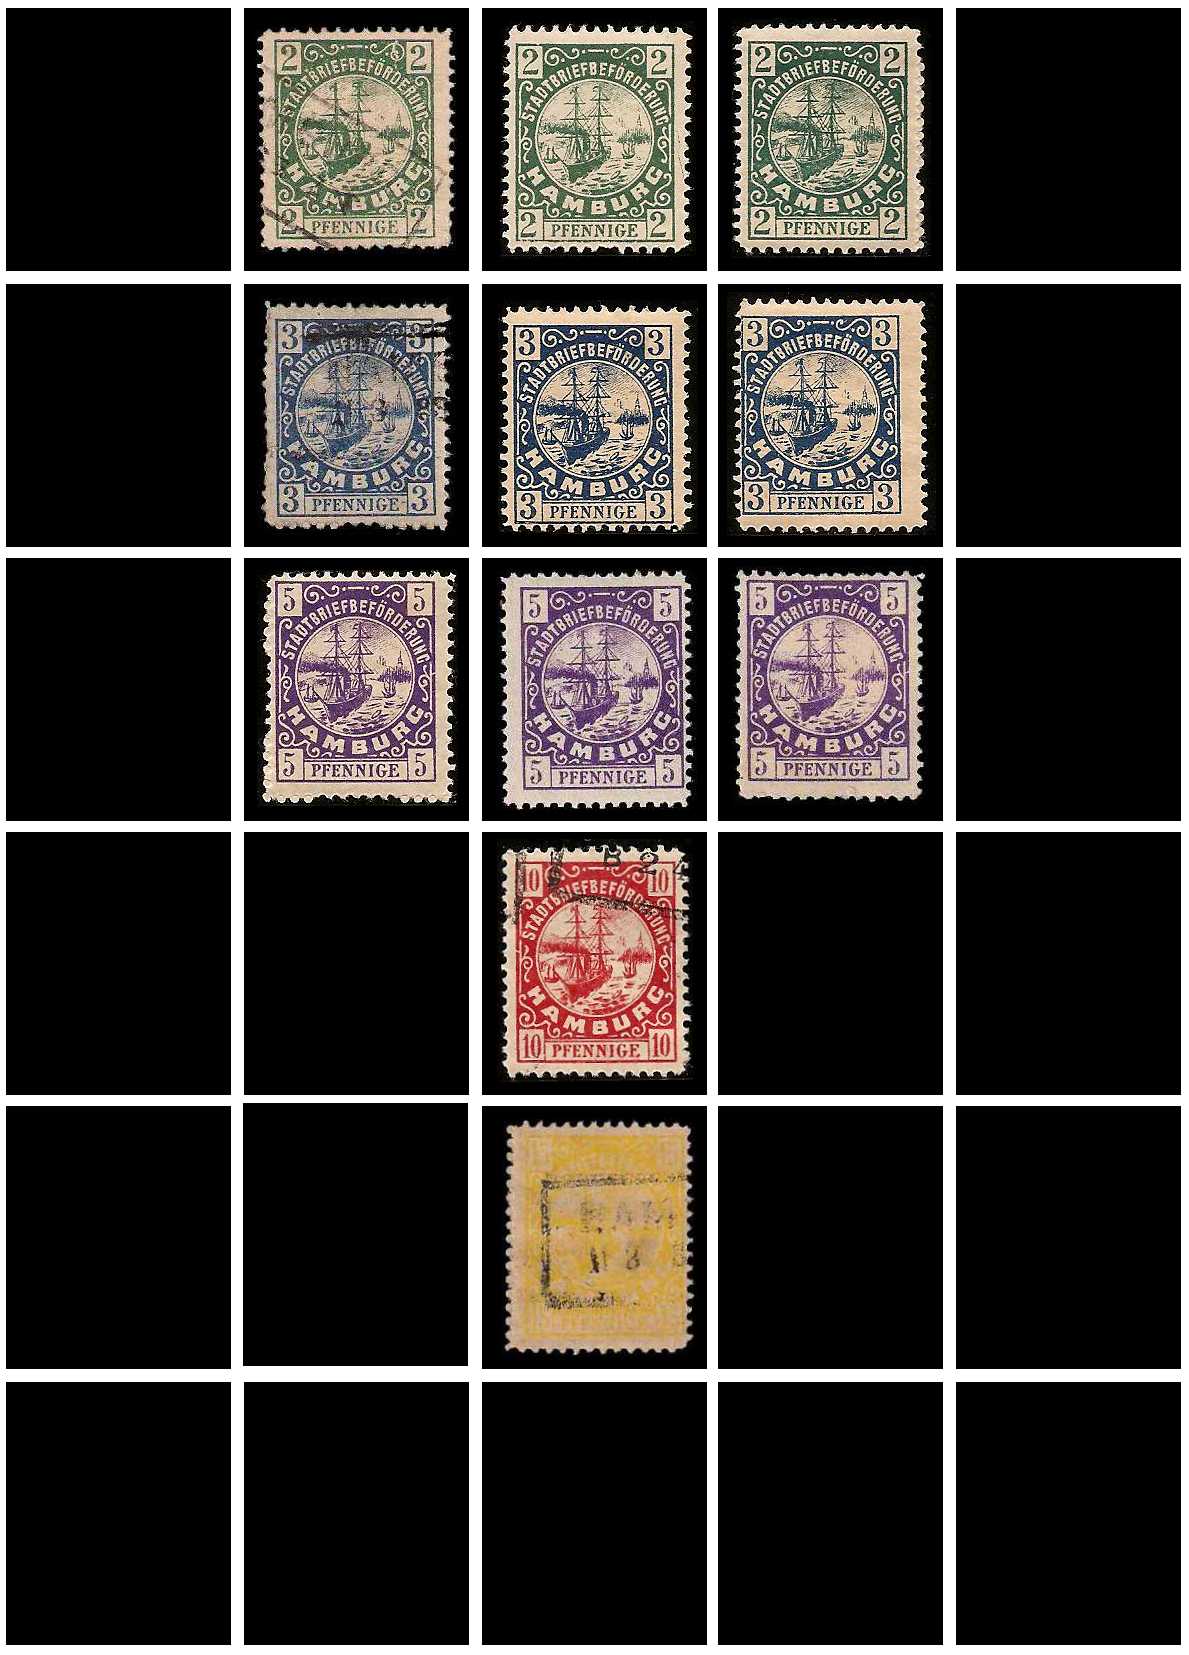 8.1887 Germany Private Mail Hamburg Mi D 10/16 collection 02